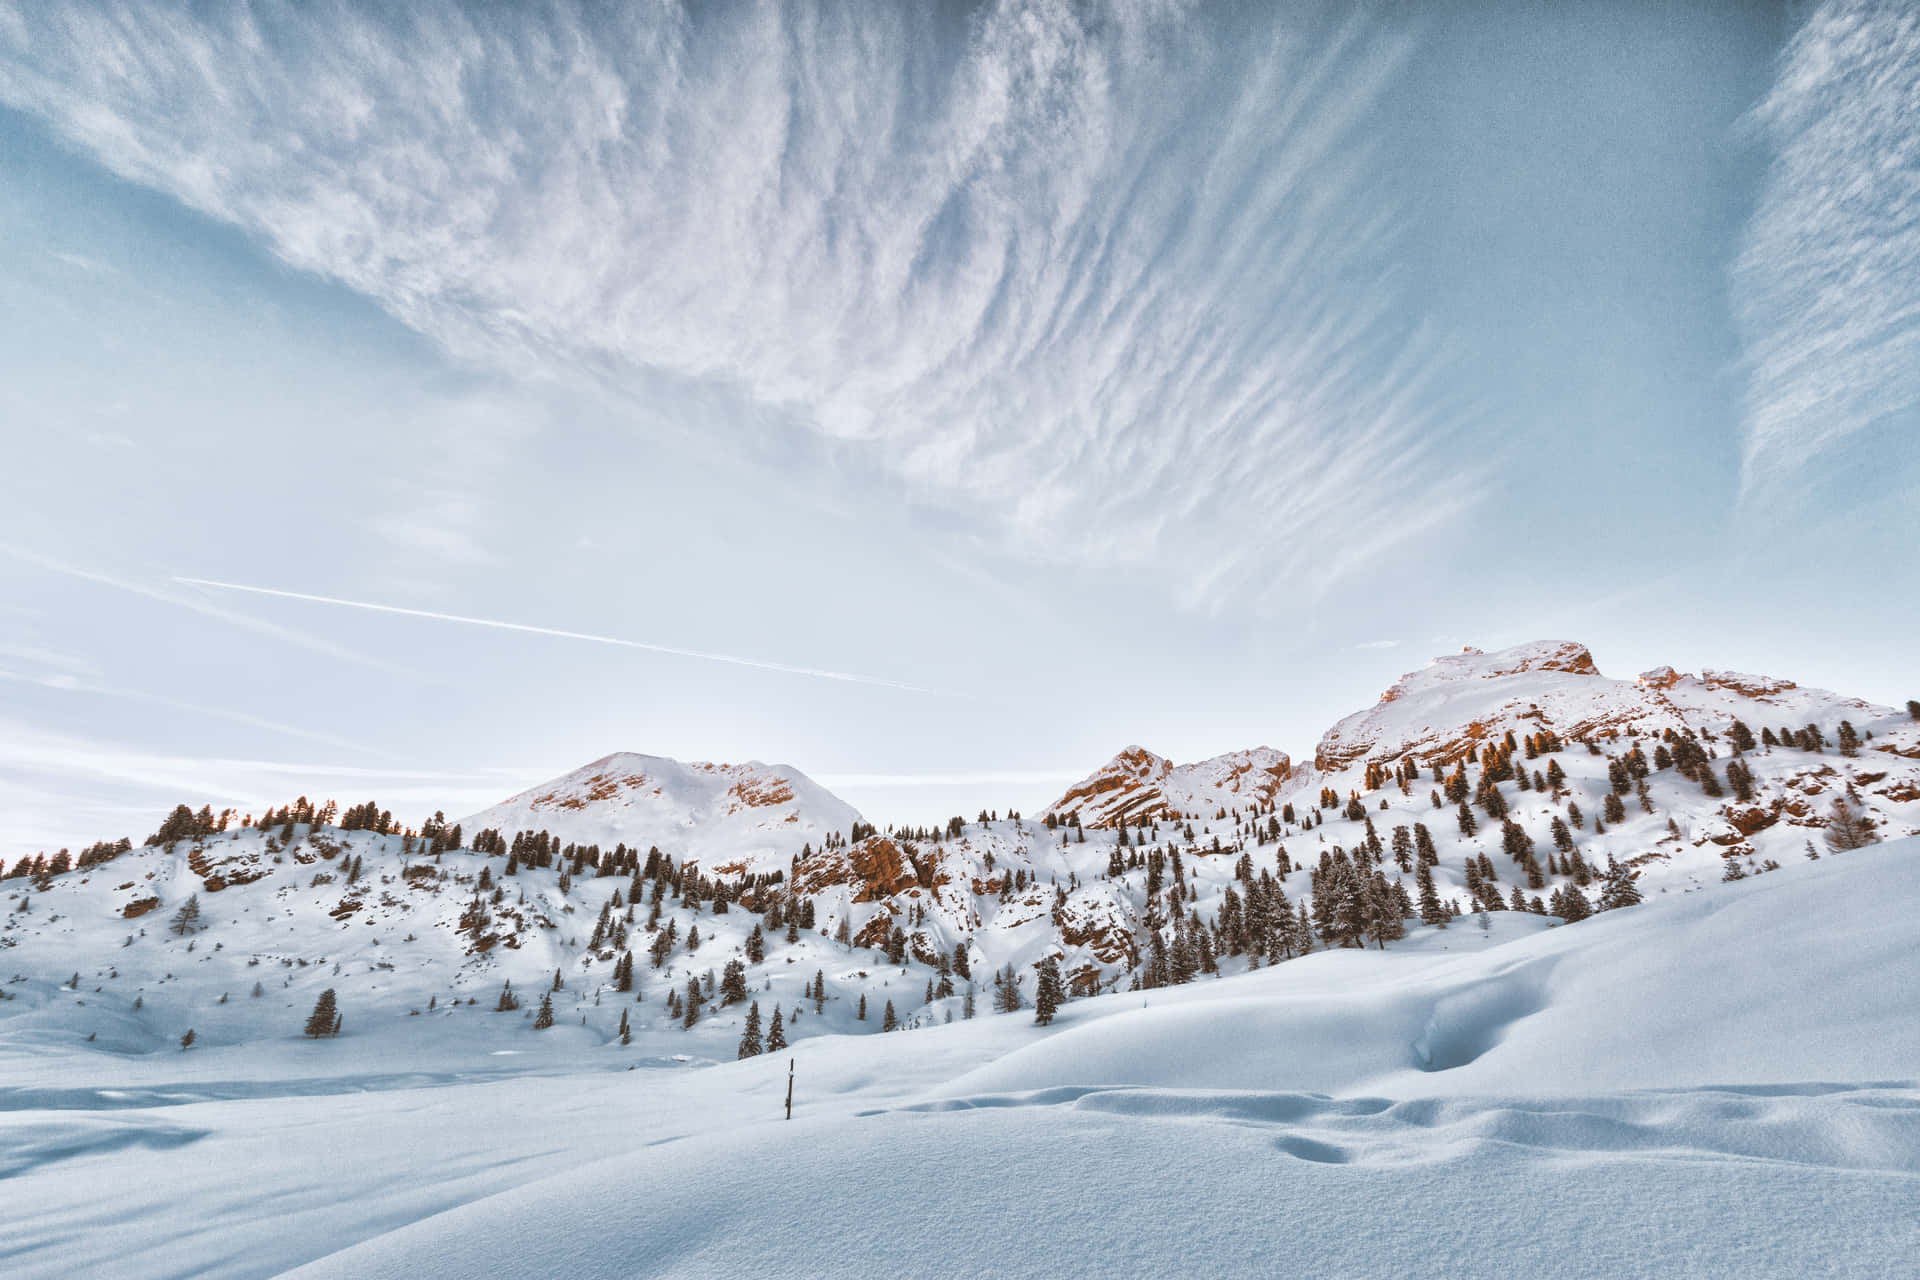 Embrace the chill with this wintery landscape.